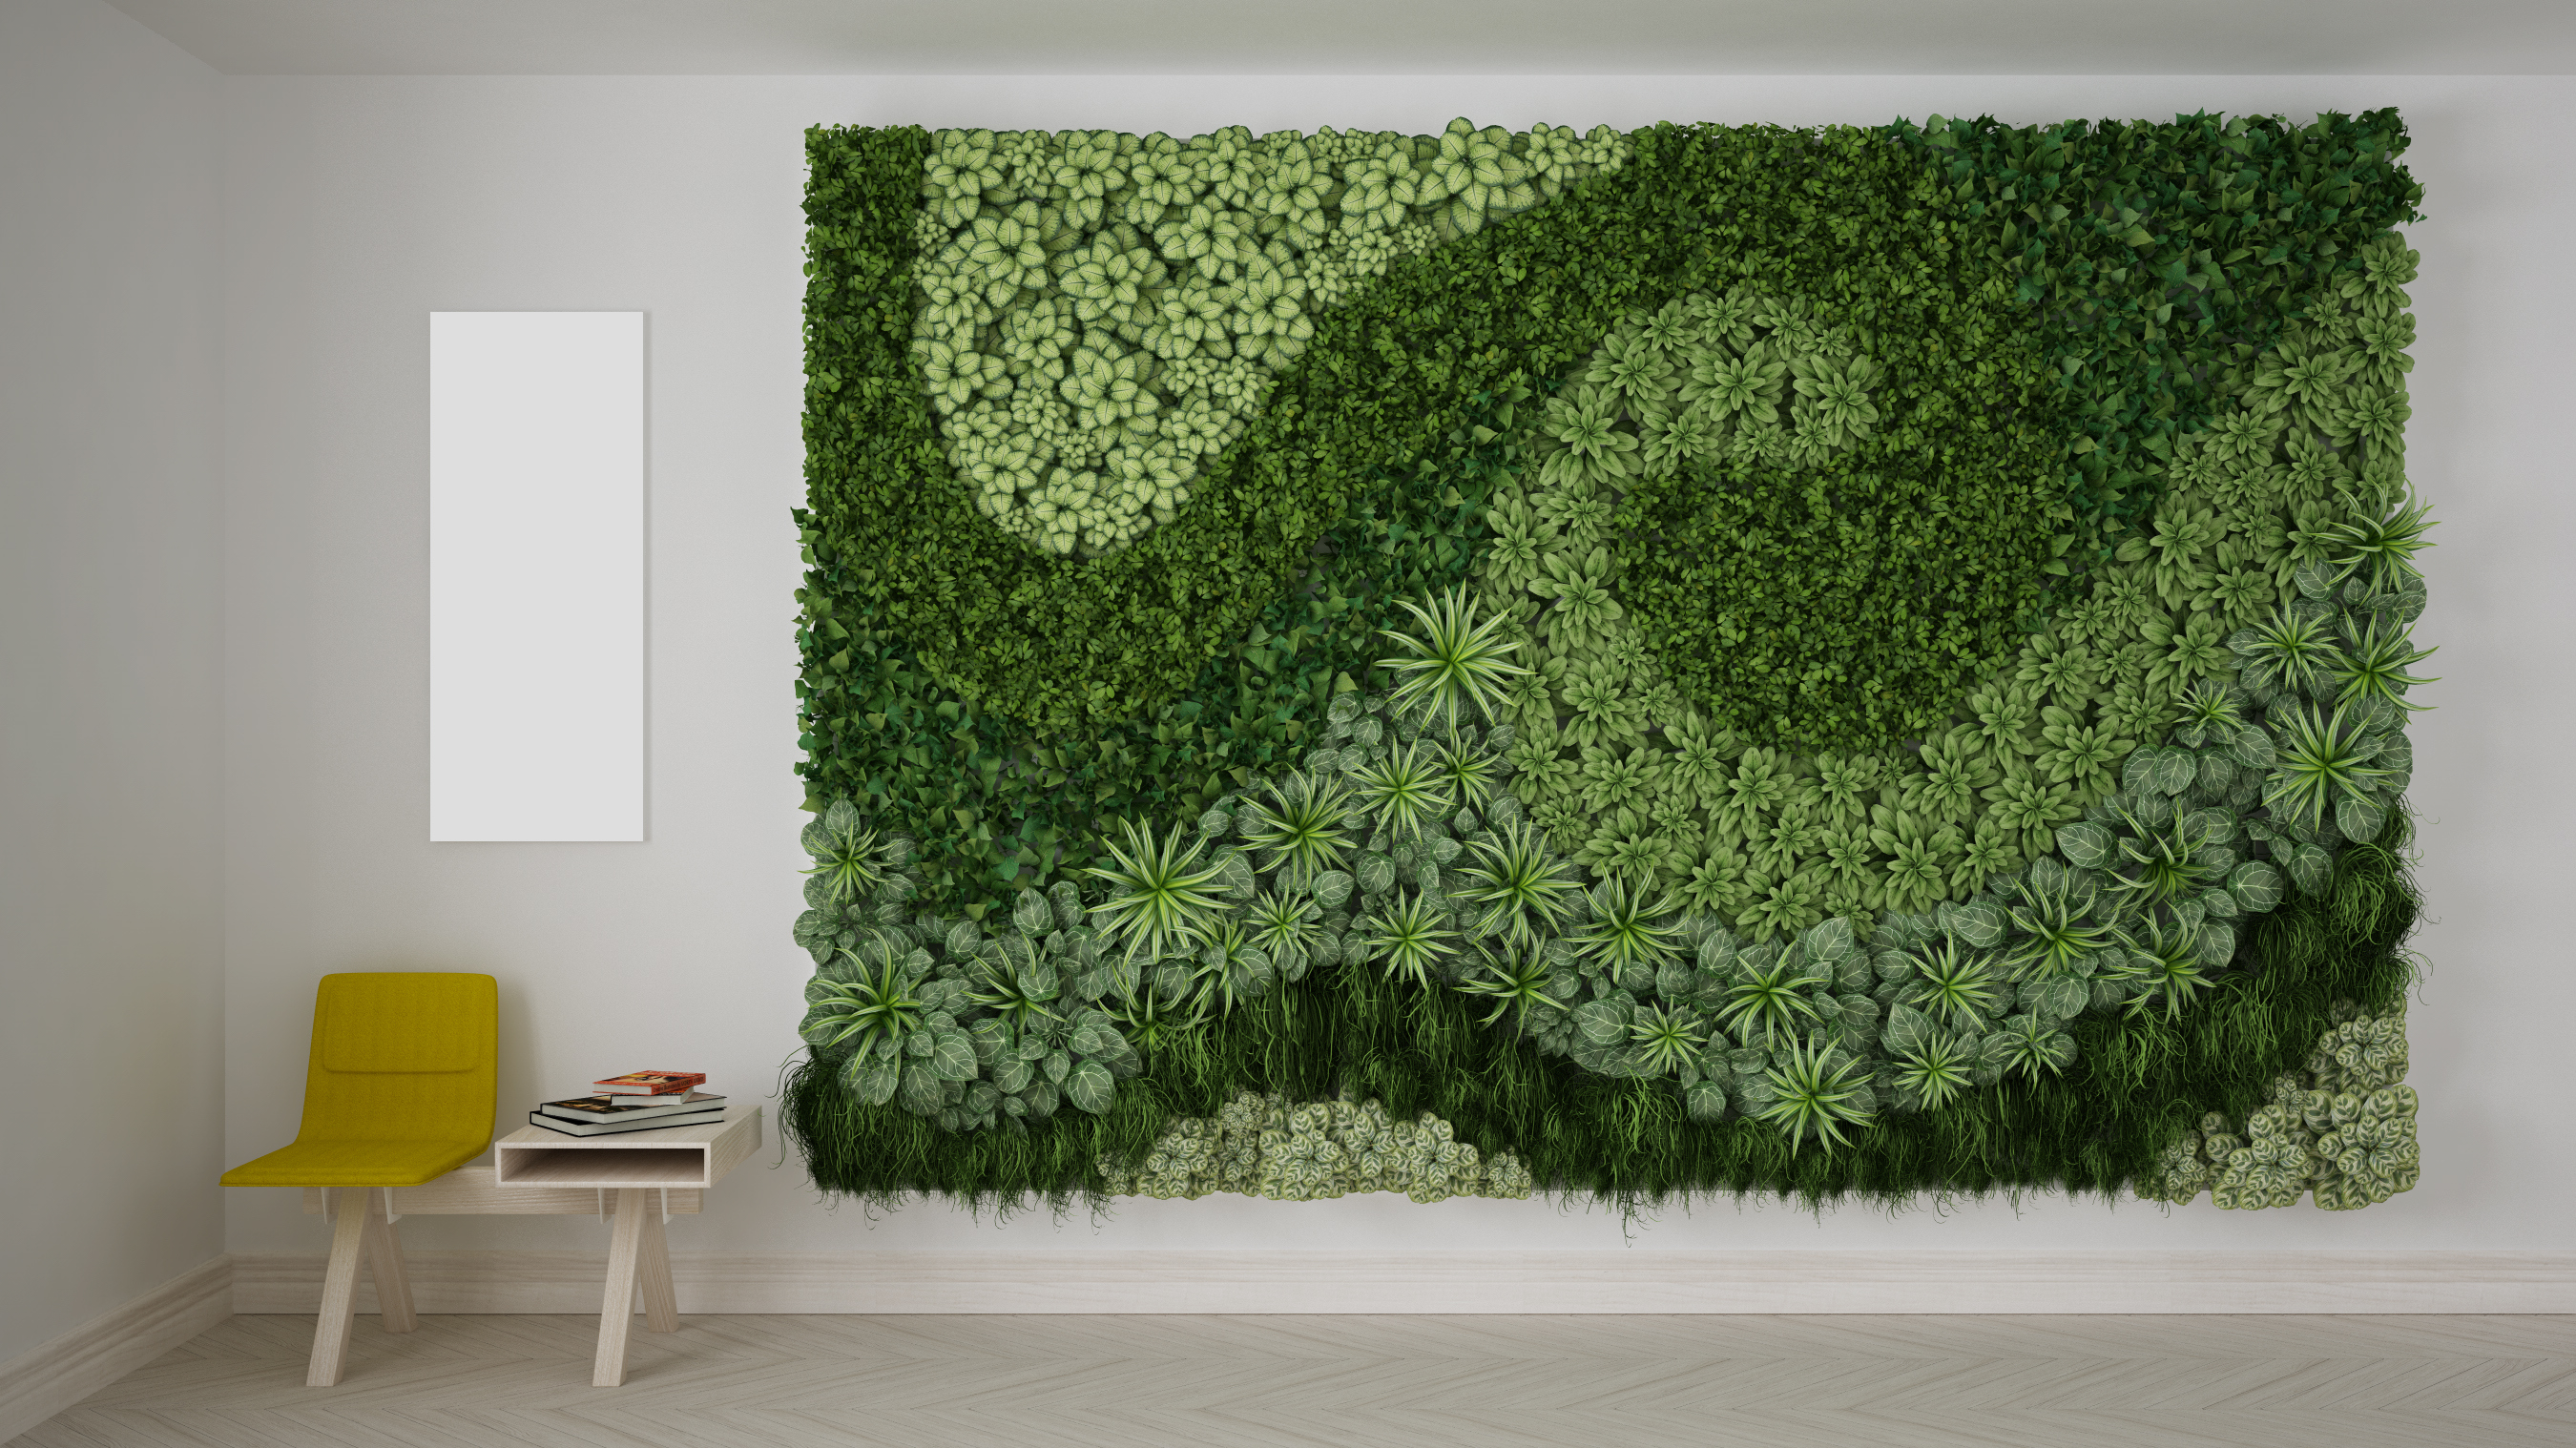 What You Need To Know About Eco Friendly Interior Design